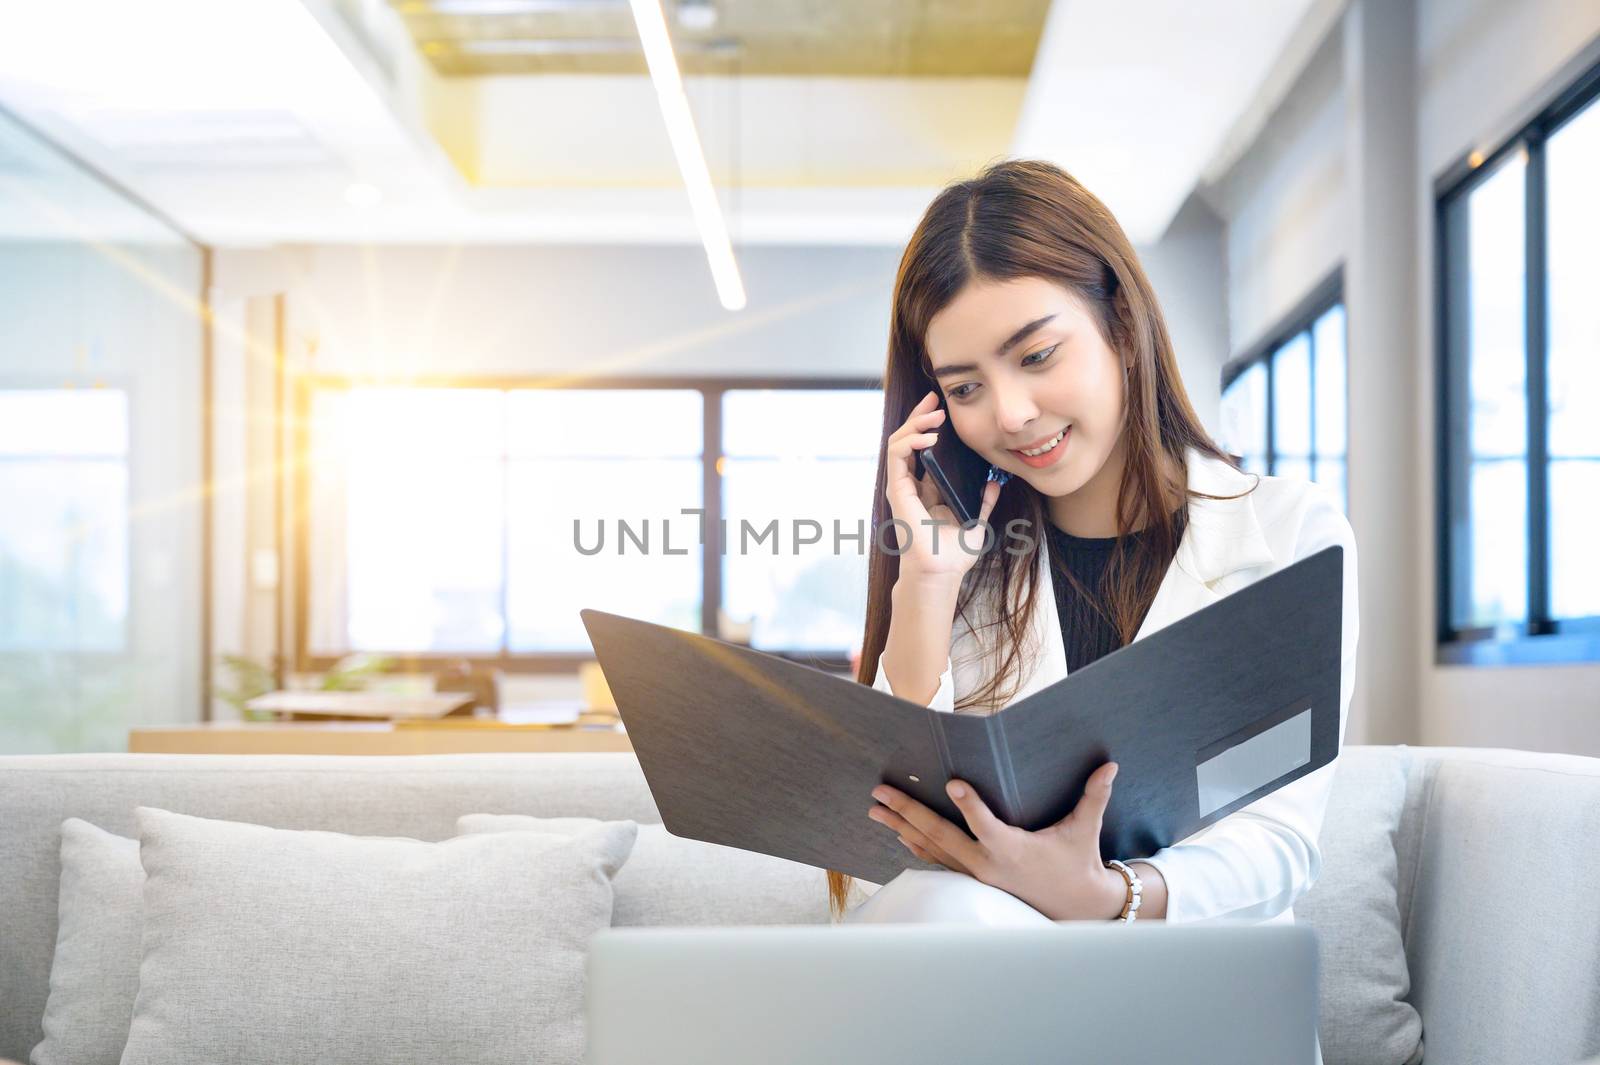 Business women holding files and talking on the phone